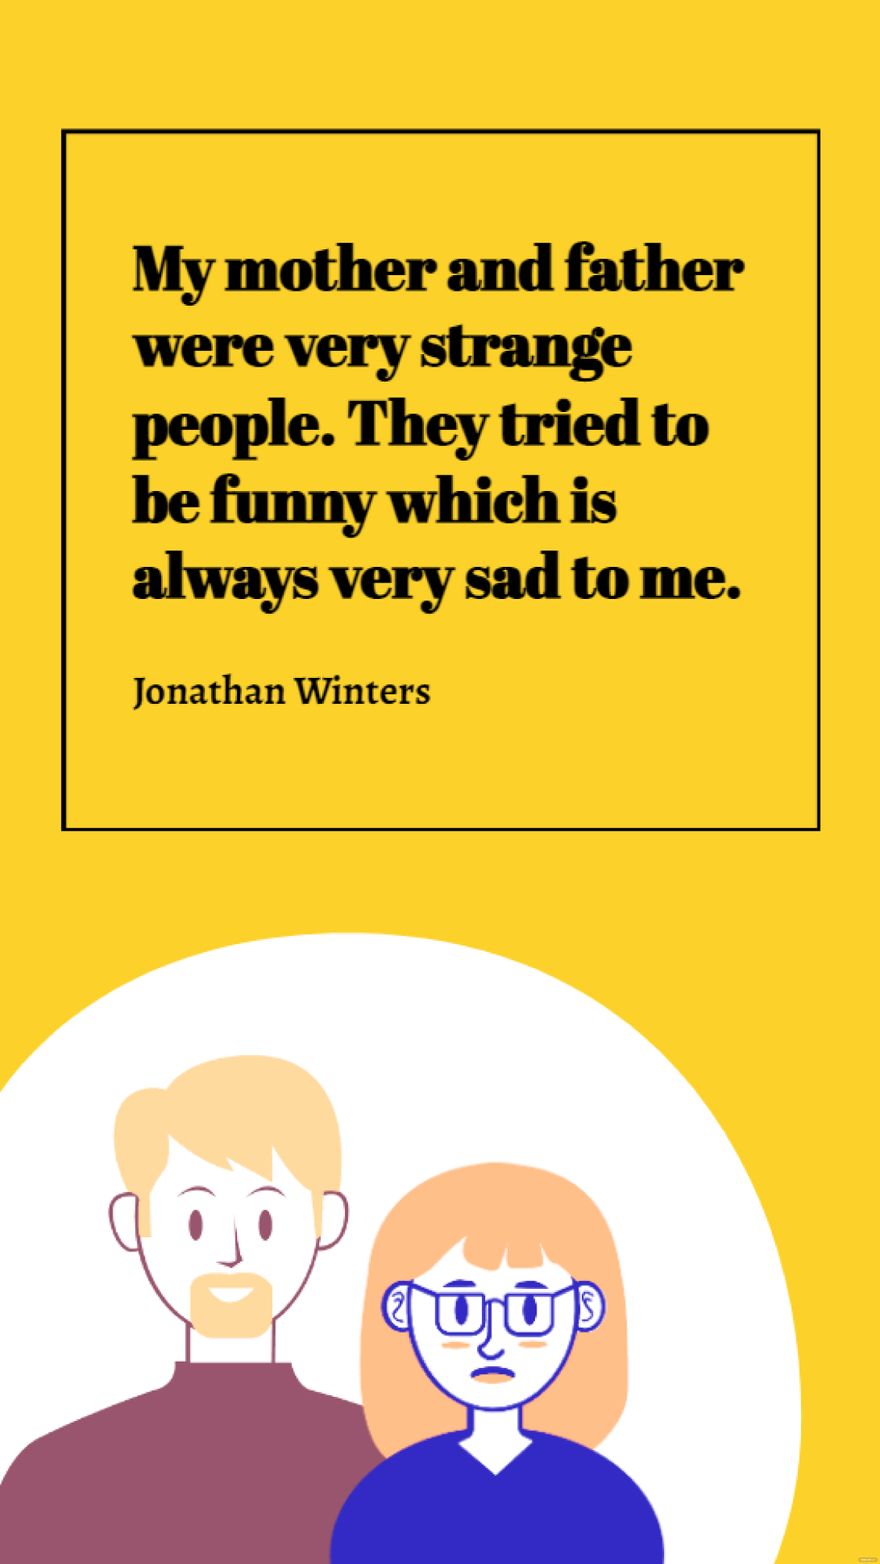 Jonathan Winters - My mother and father were very strange people. They tried to be funny which is always very sad to me.